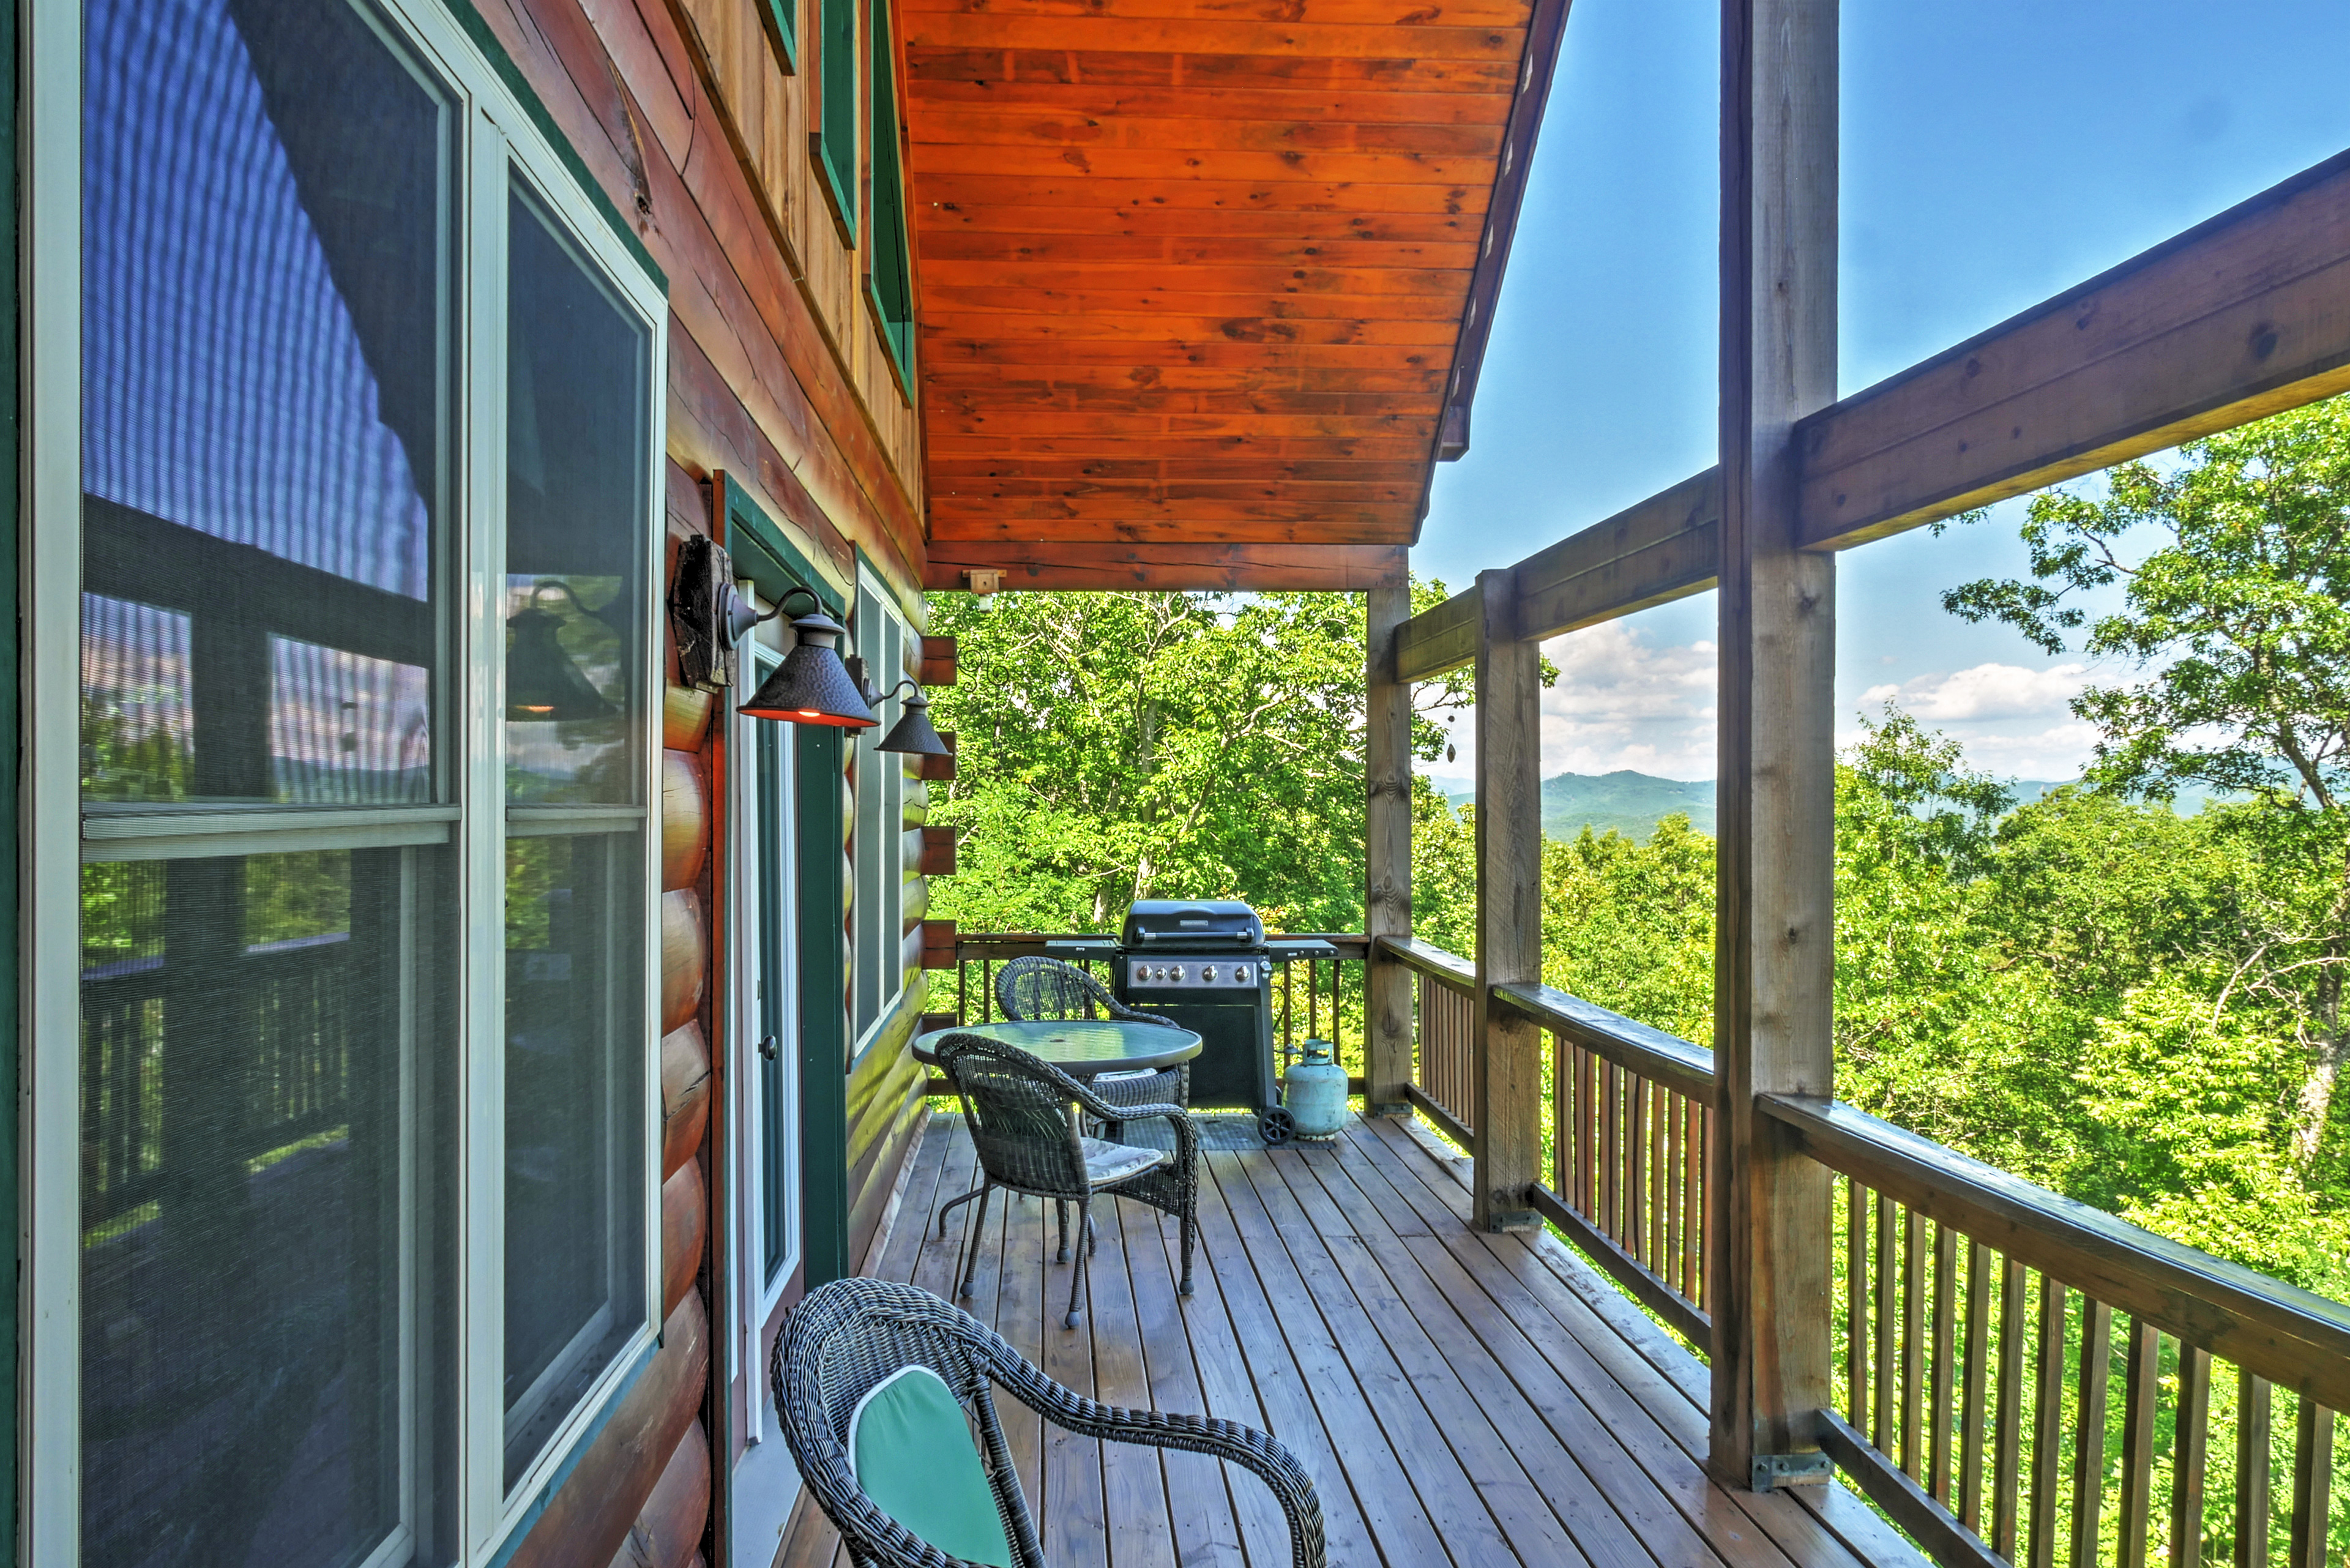 Secluded Morganton Cabin w/ Wooded Views & Hot Tub